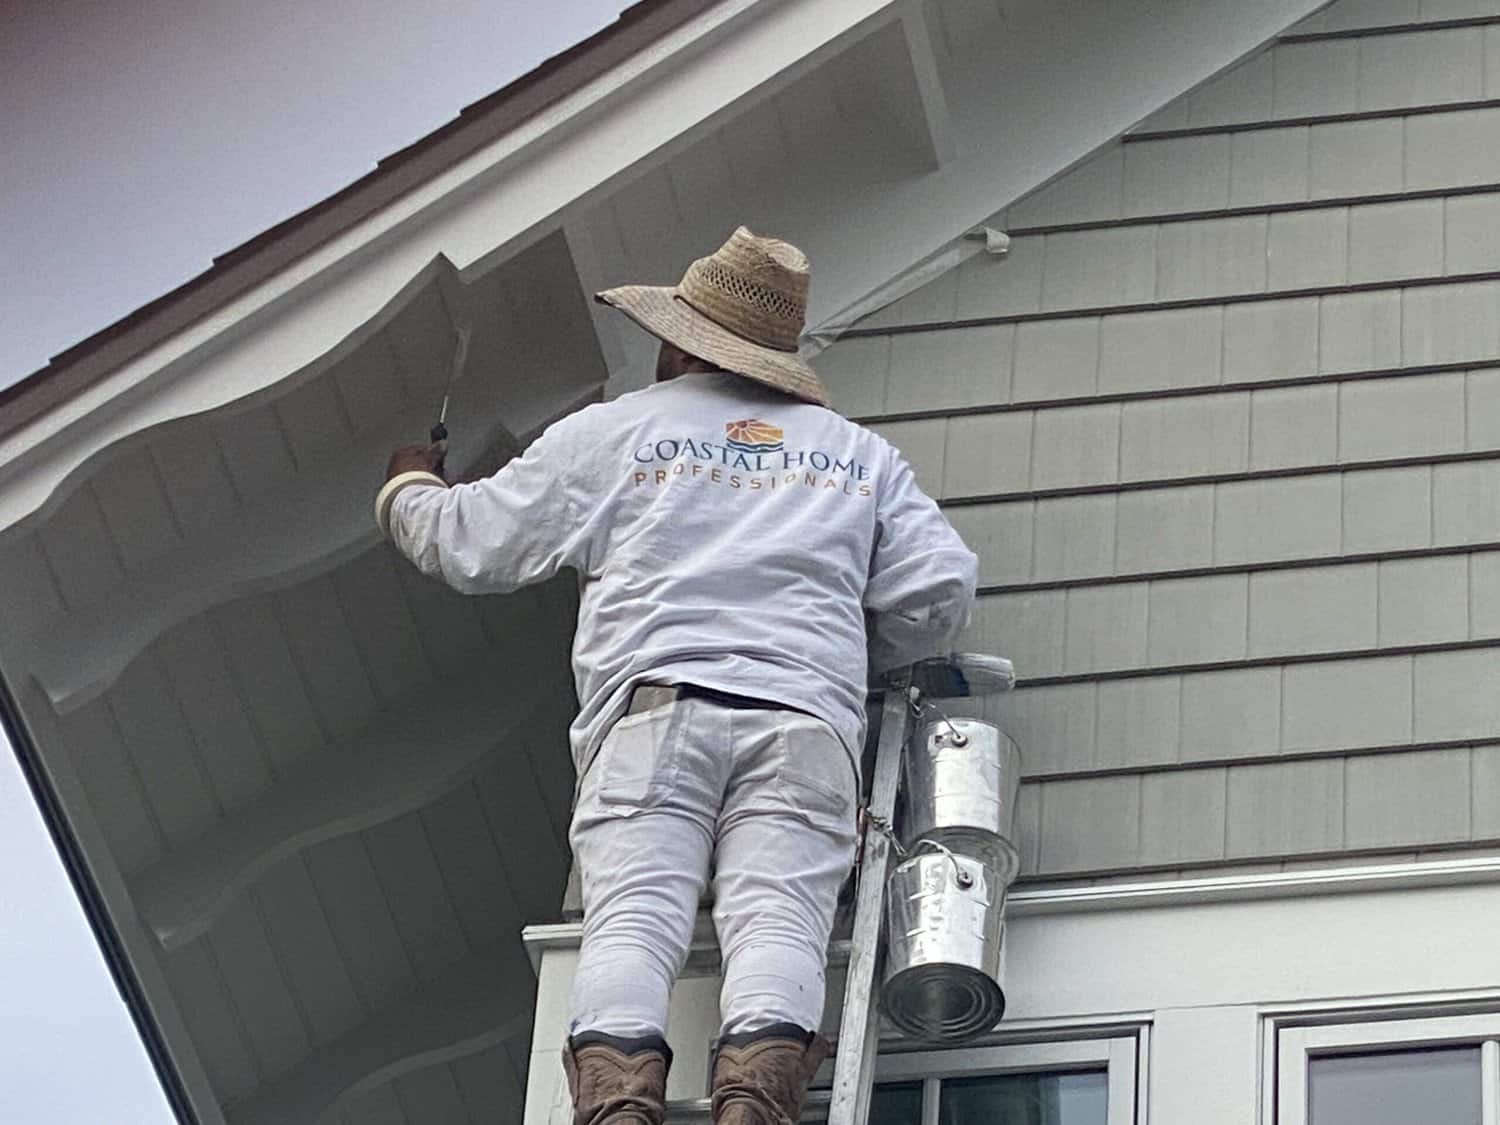 A Coastal Home Professional painter is on a ladder and painting the eaves of a roof